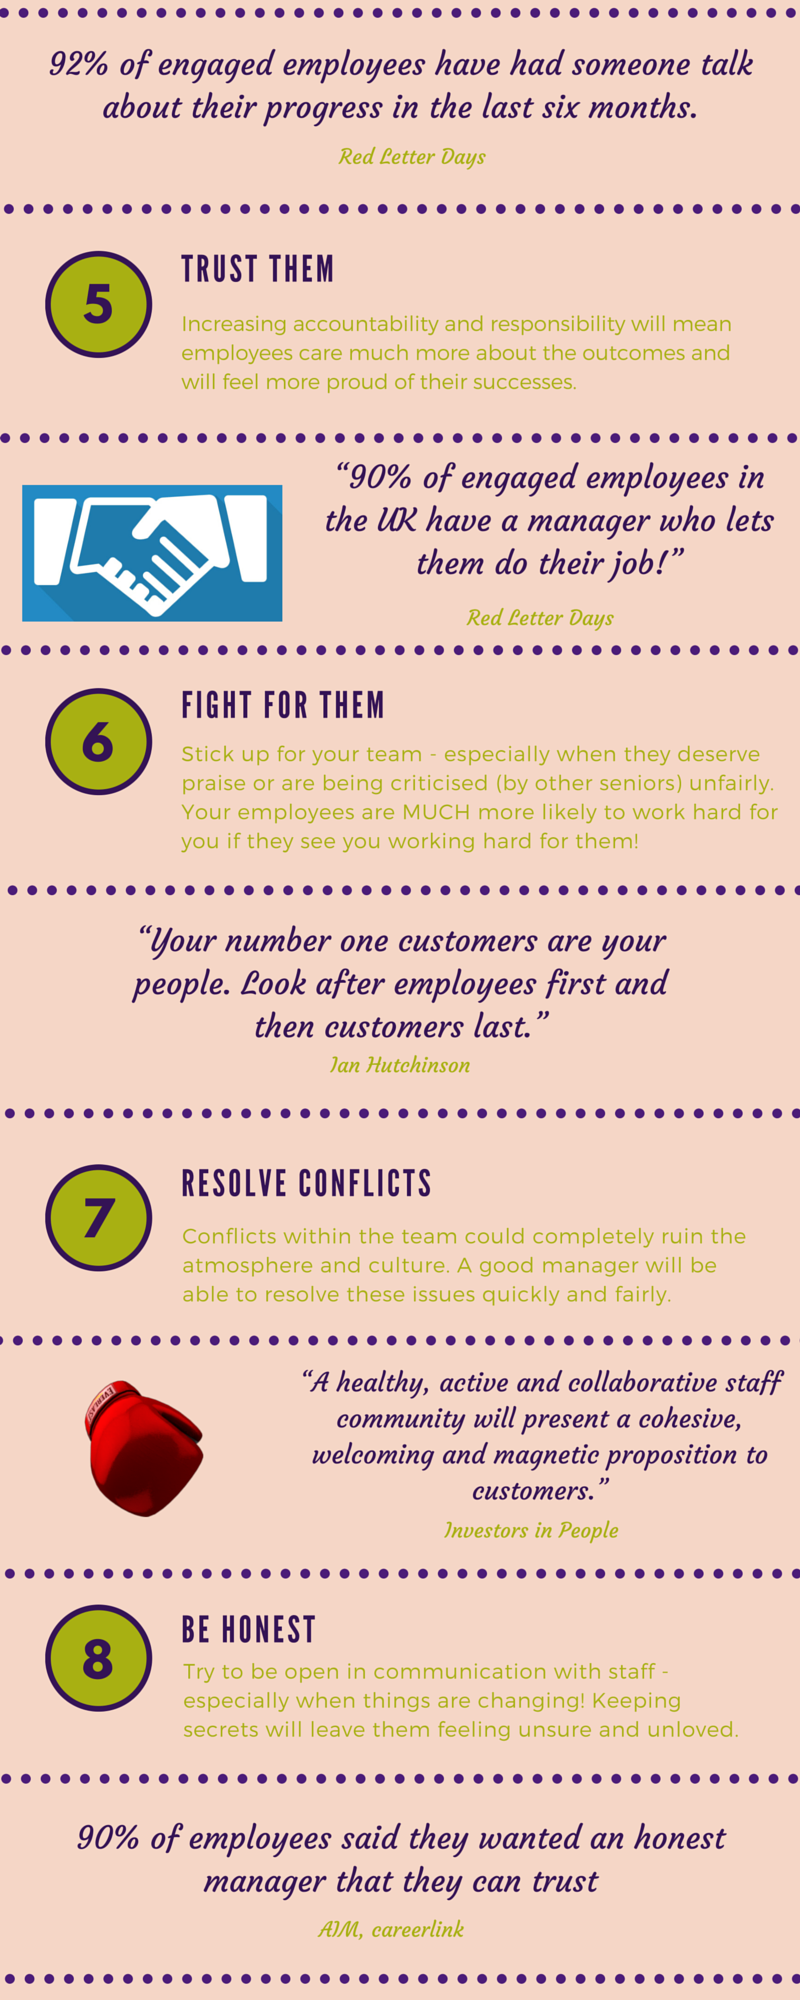 10-simple-ways-to-engage-your-employees-infographic-by-coburg-banks